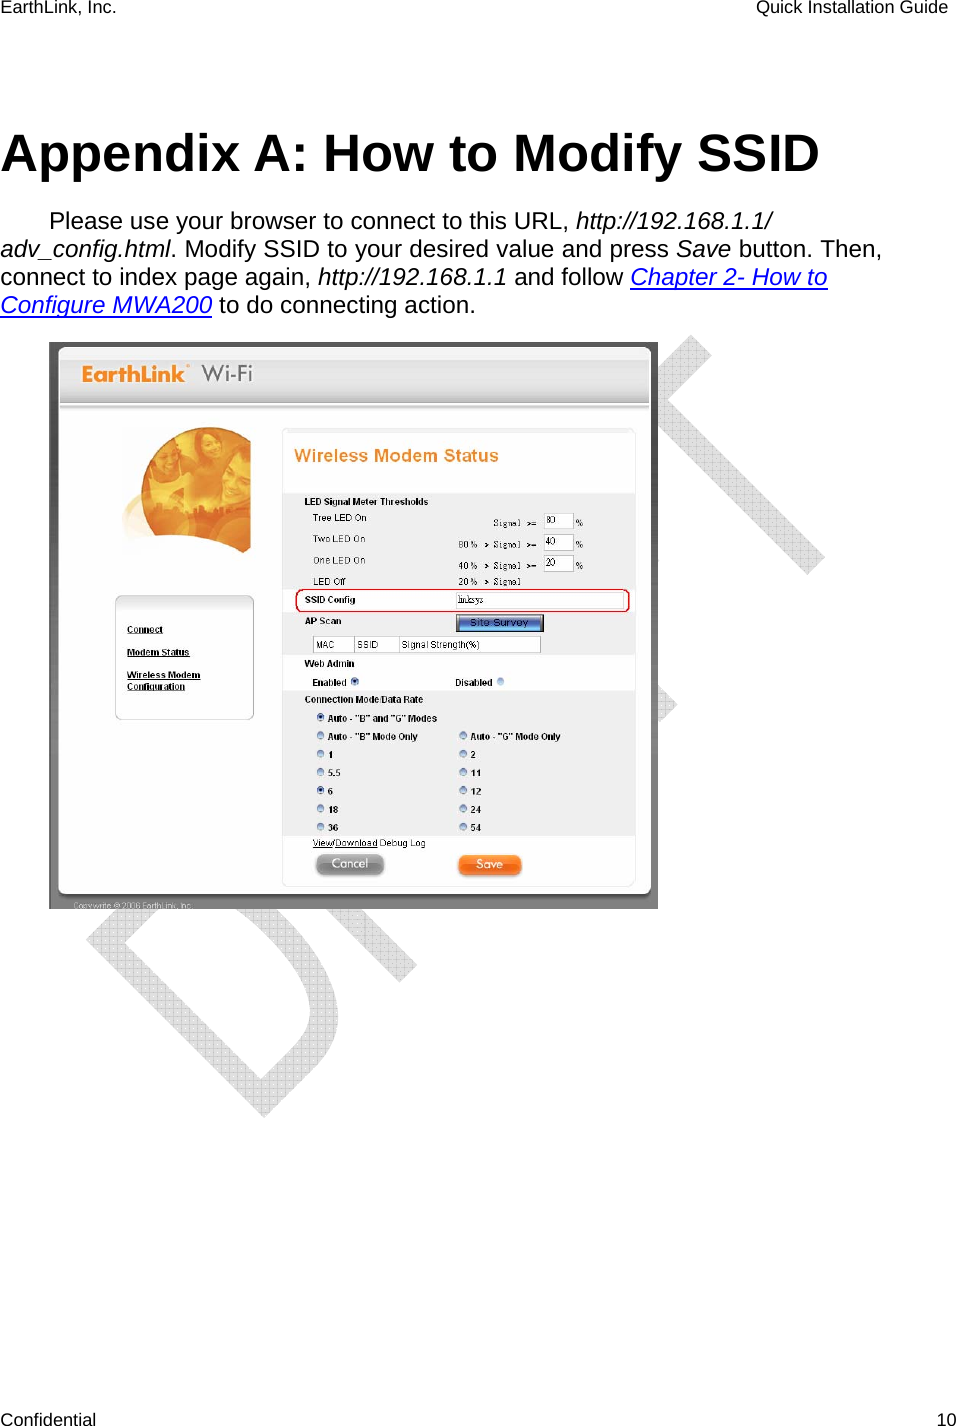 EarthLink, Inc.    Quick Installation Guide    Confidential   10  Appendix A: How to Modify SSID Please use your browser to connect to this URL, http://192.168.1.1/ adv_config.html. Modify SSID to your desired value and press Save button. Then, connect to index page again, http://192.168.1.1 and follow Chapter 2- How to Configure MWA200 to do connecting action.  